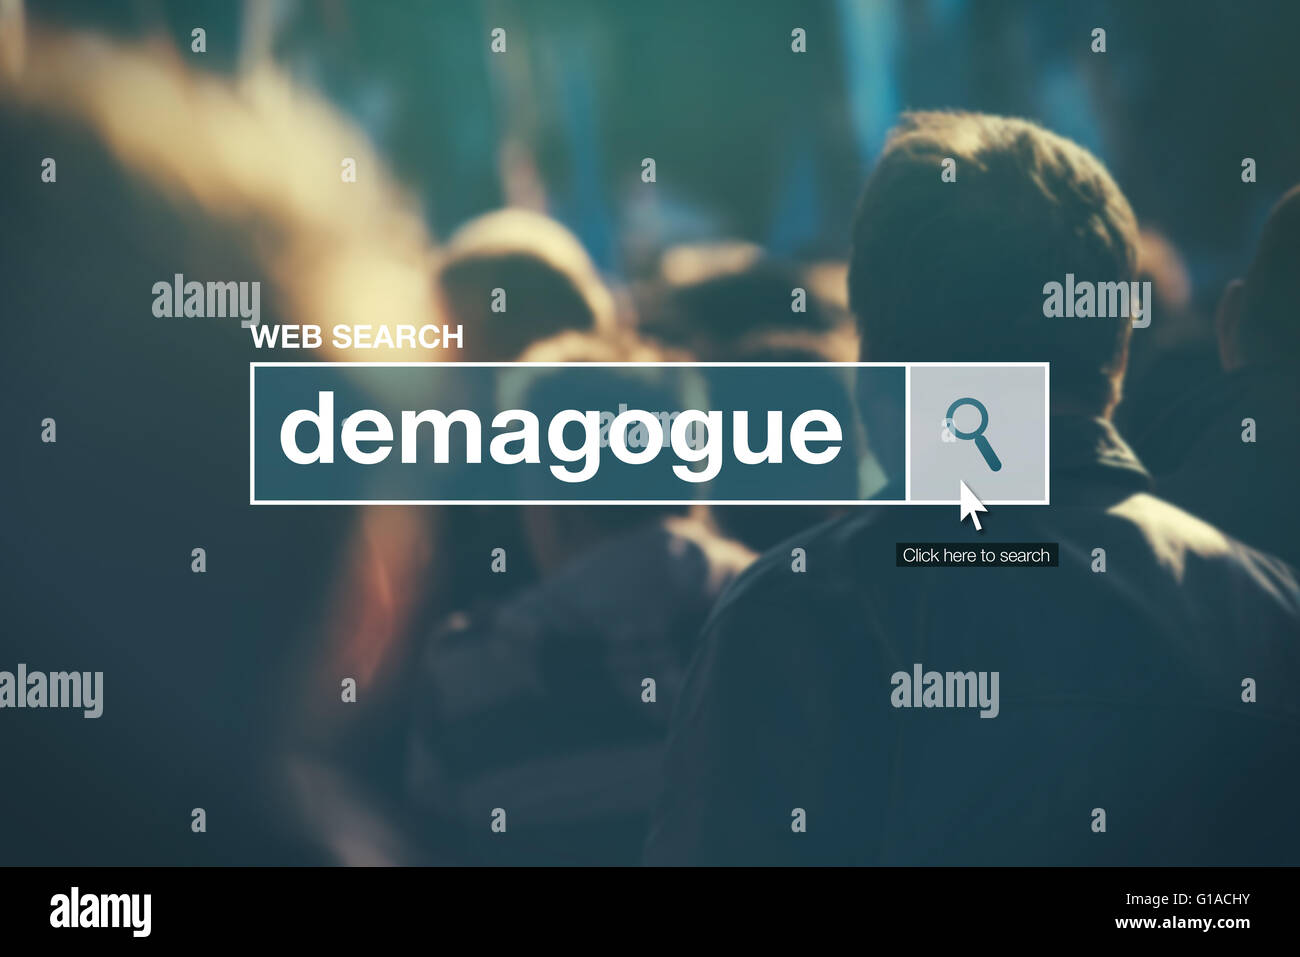 Demagogue - web search bar glossary term on internet Stock Photo